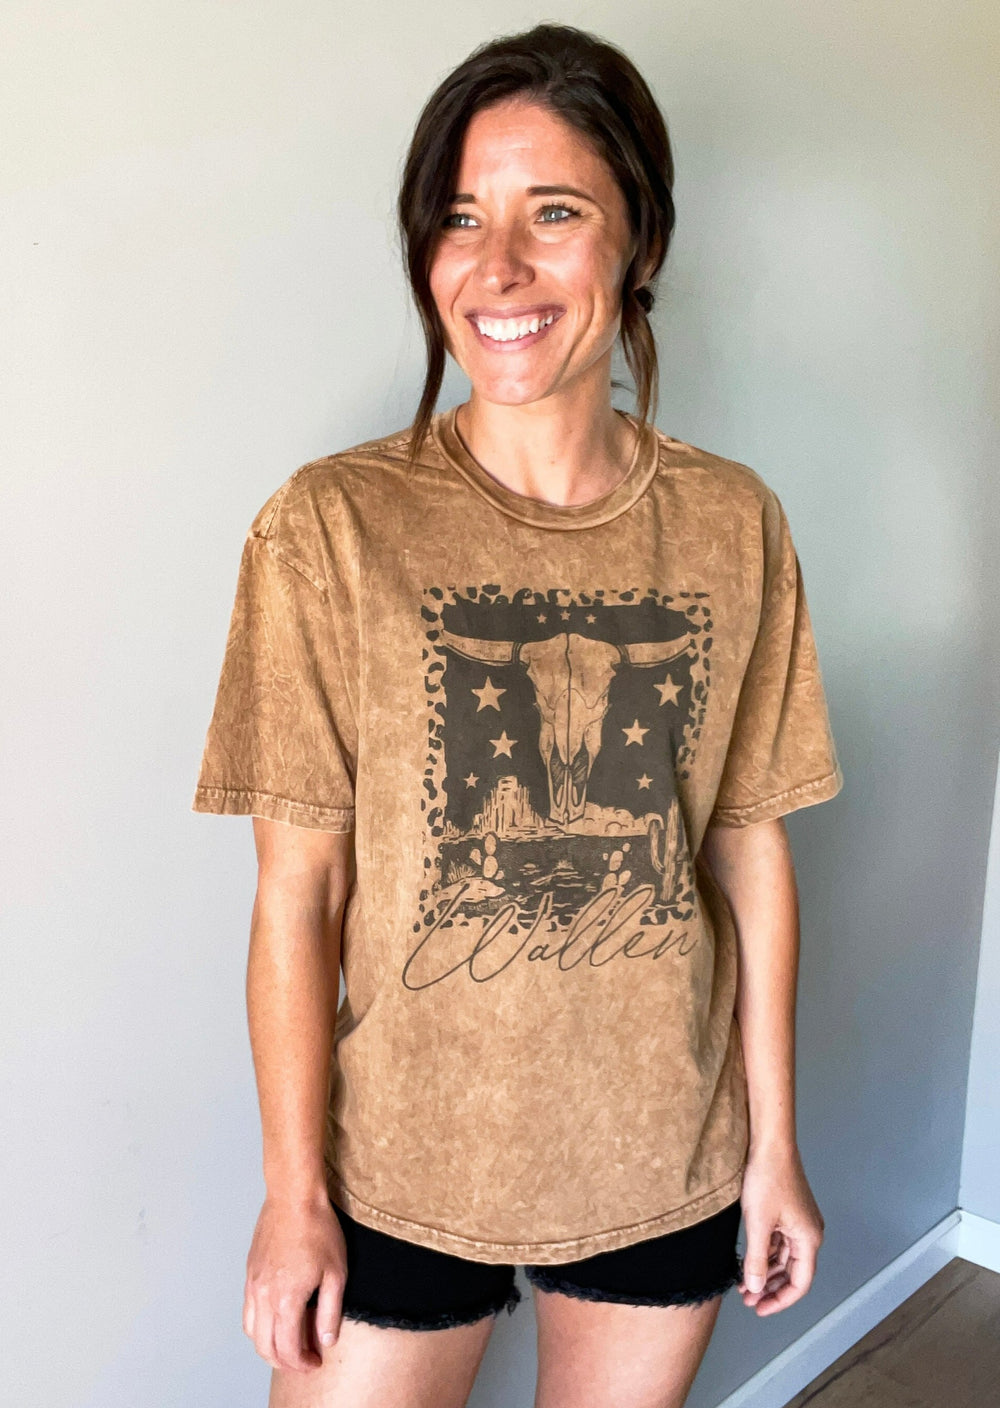 Graphic Tee for Country Concert | Wallen Tee | Country Western Graphic Tees